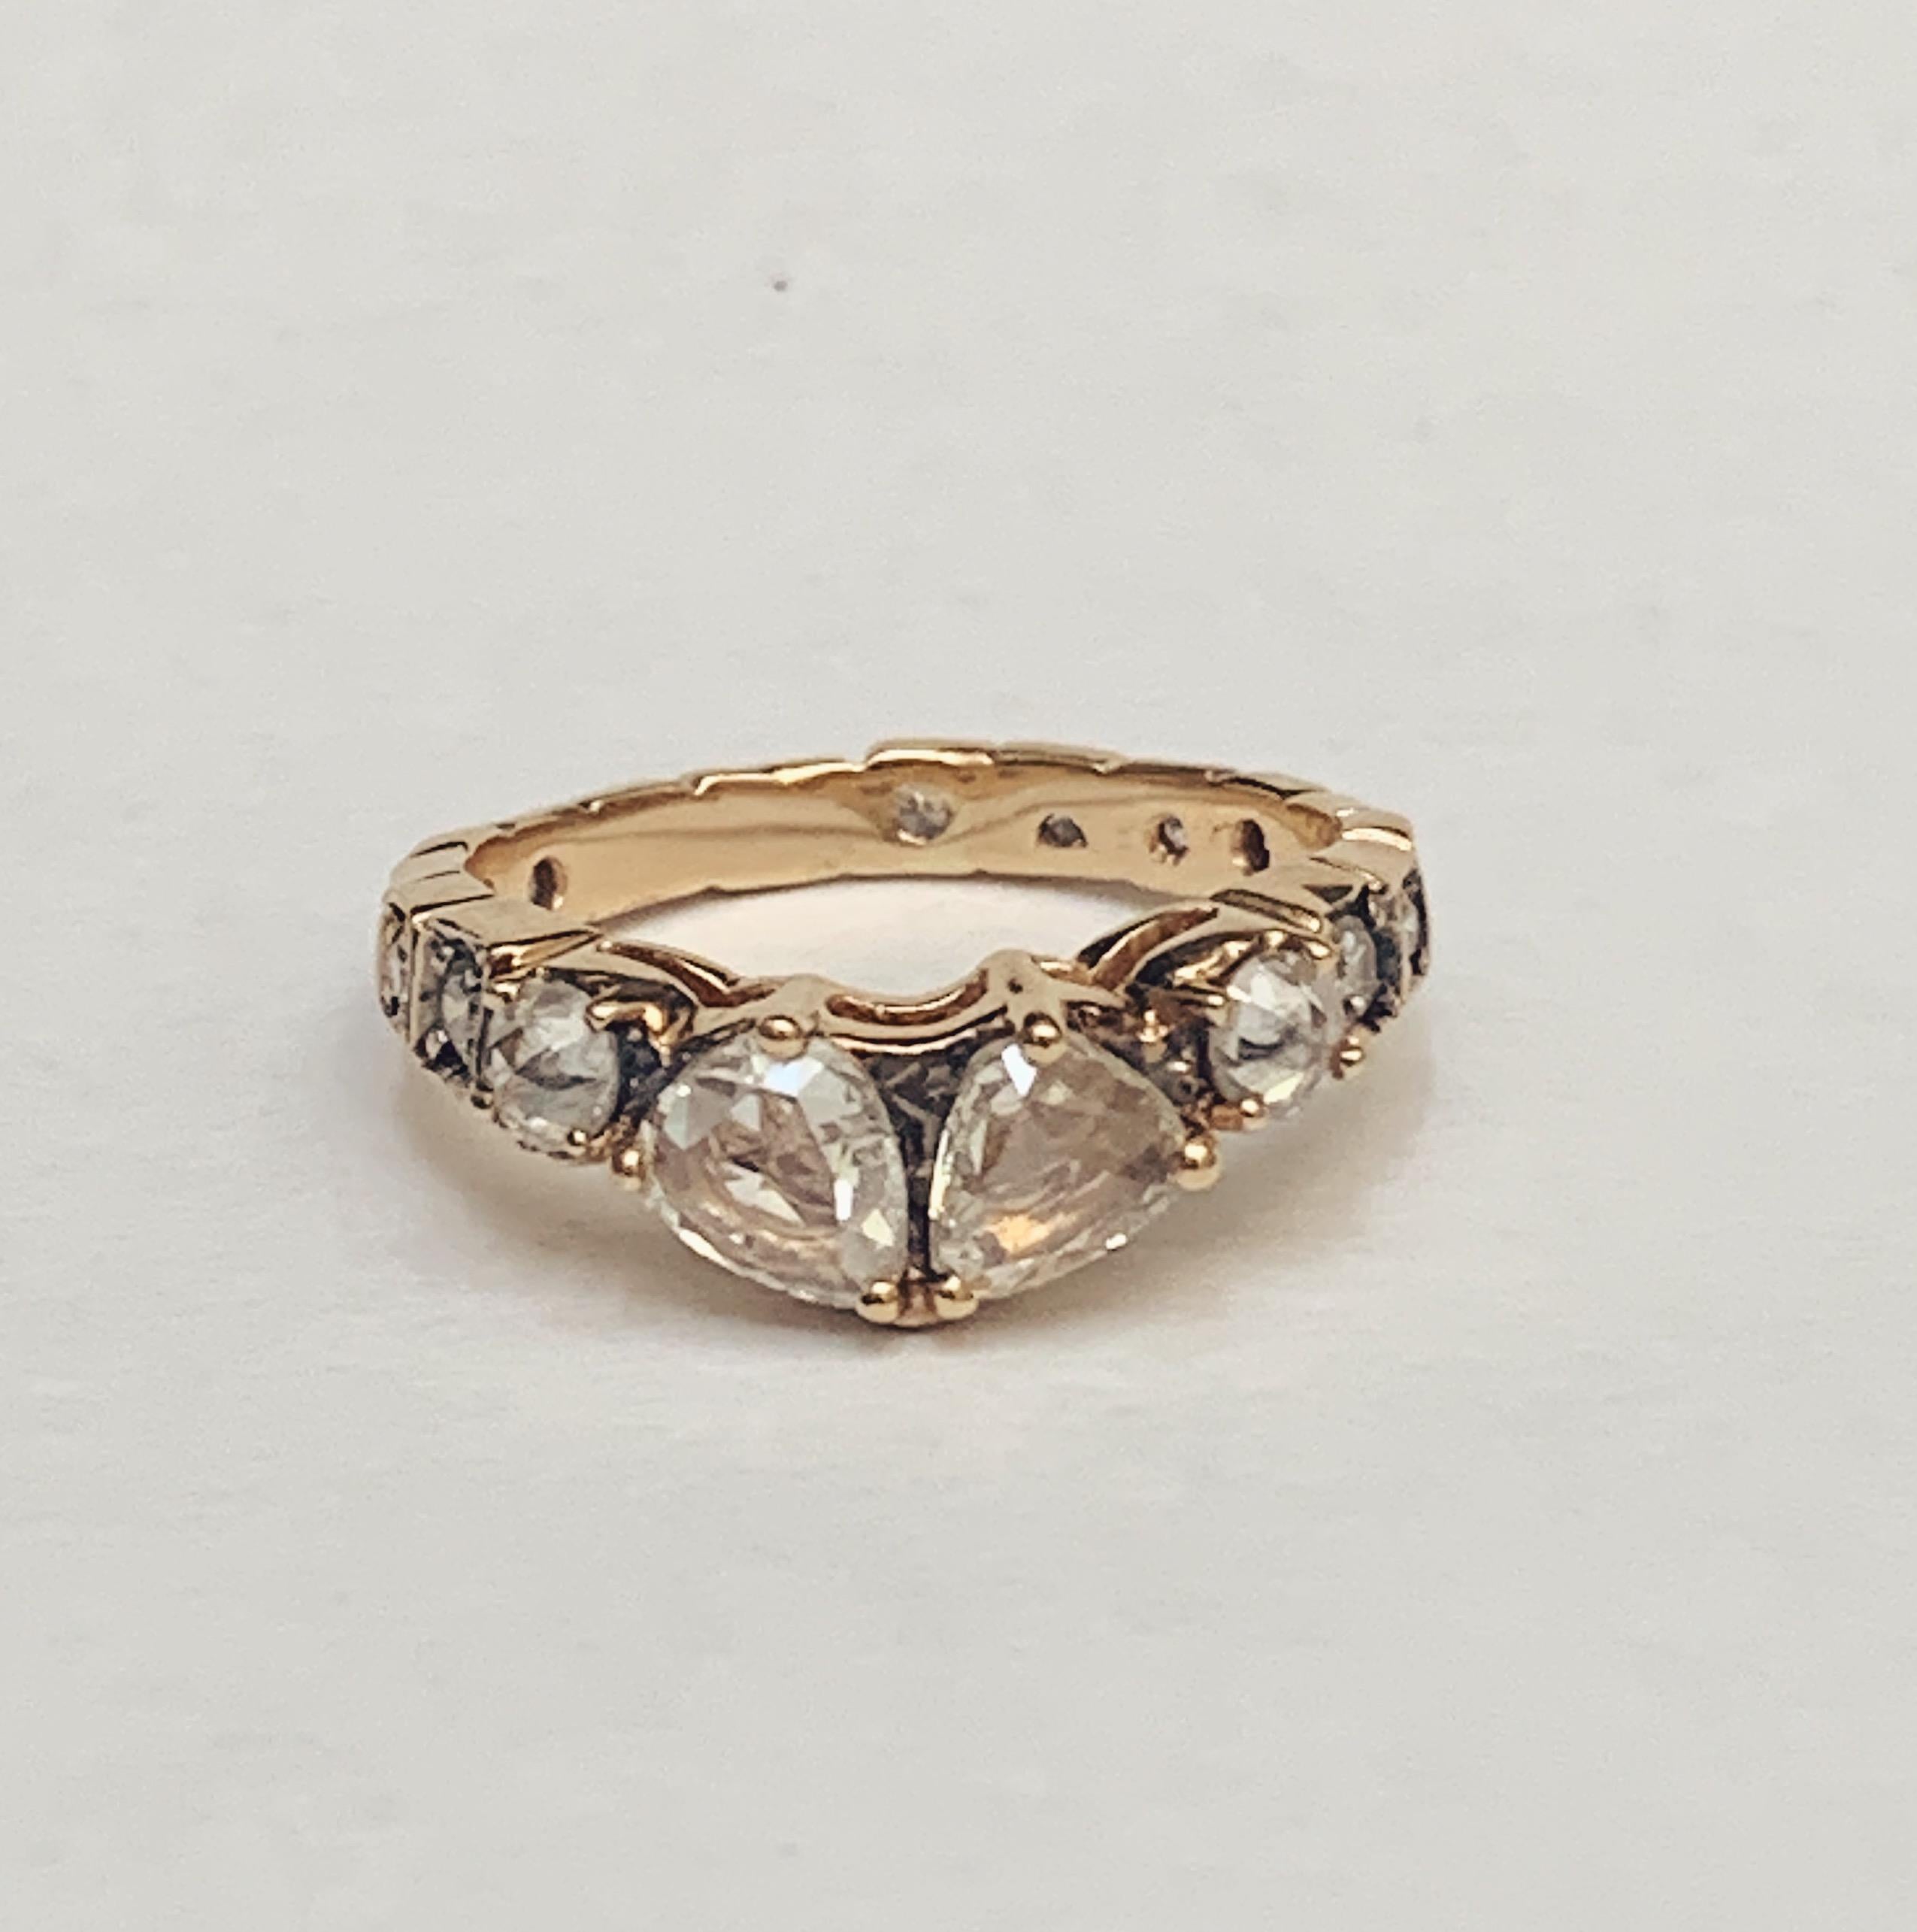 MANIAMANIA Sacred band in 14k yellow gold with White Diamonds. Featuring two 5x4mm rose cut pear-shaped White Diamonds (0.4-0.5ctw), two 3mm round rose cut Rustic Diamond shoulders (0.24ct), and eternity band of diamond accents (0.4ctw). Size